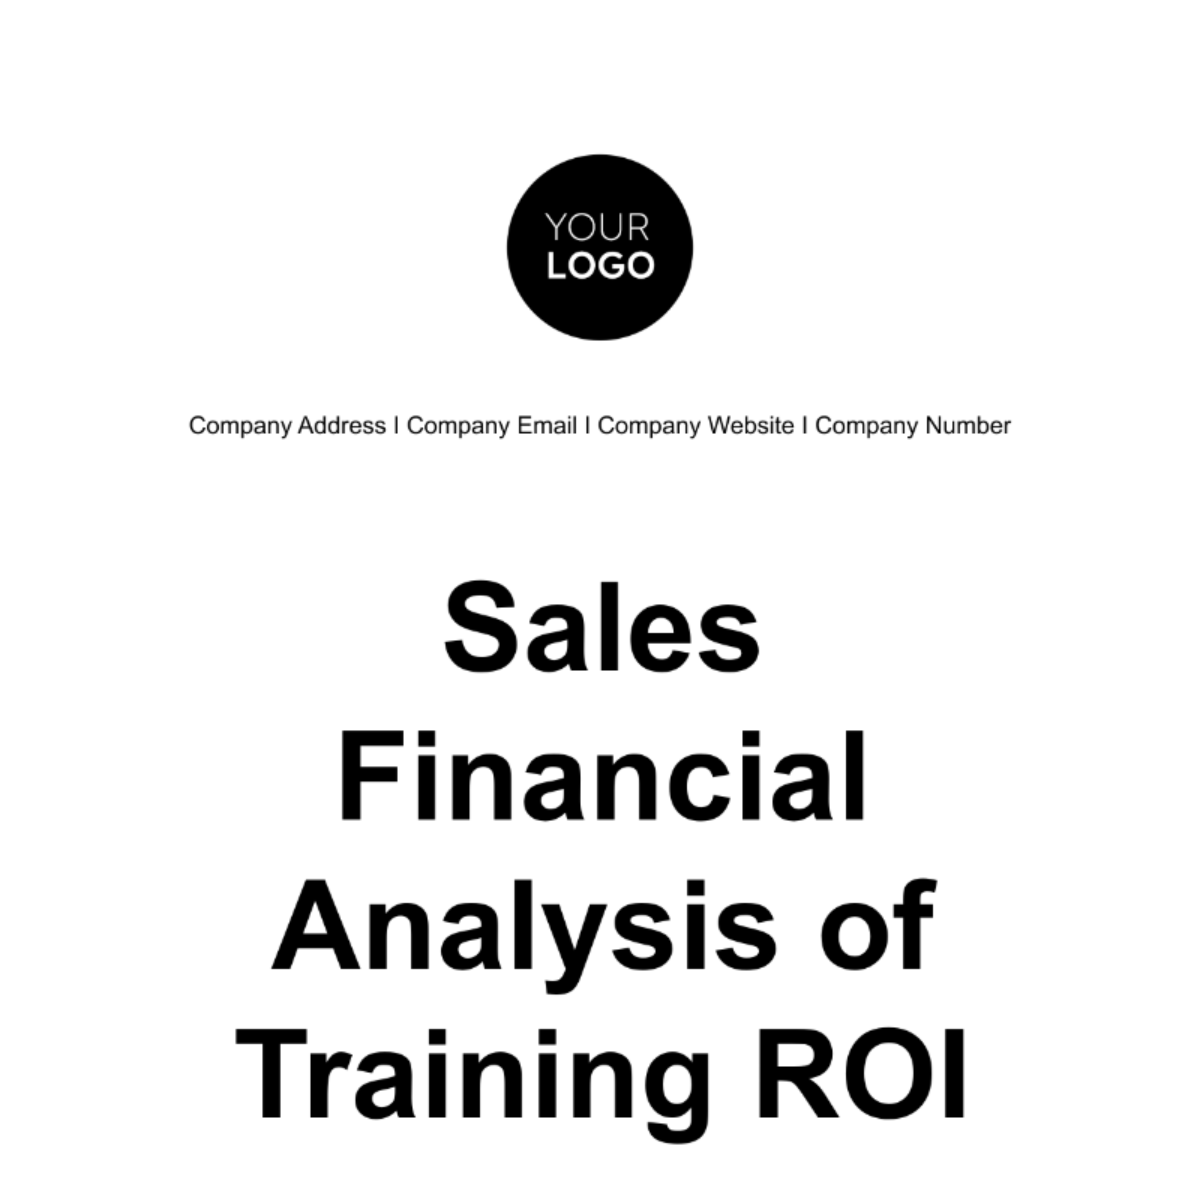 Sales Financial Analysis of Training ROI Template